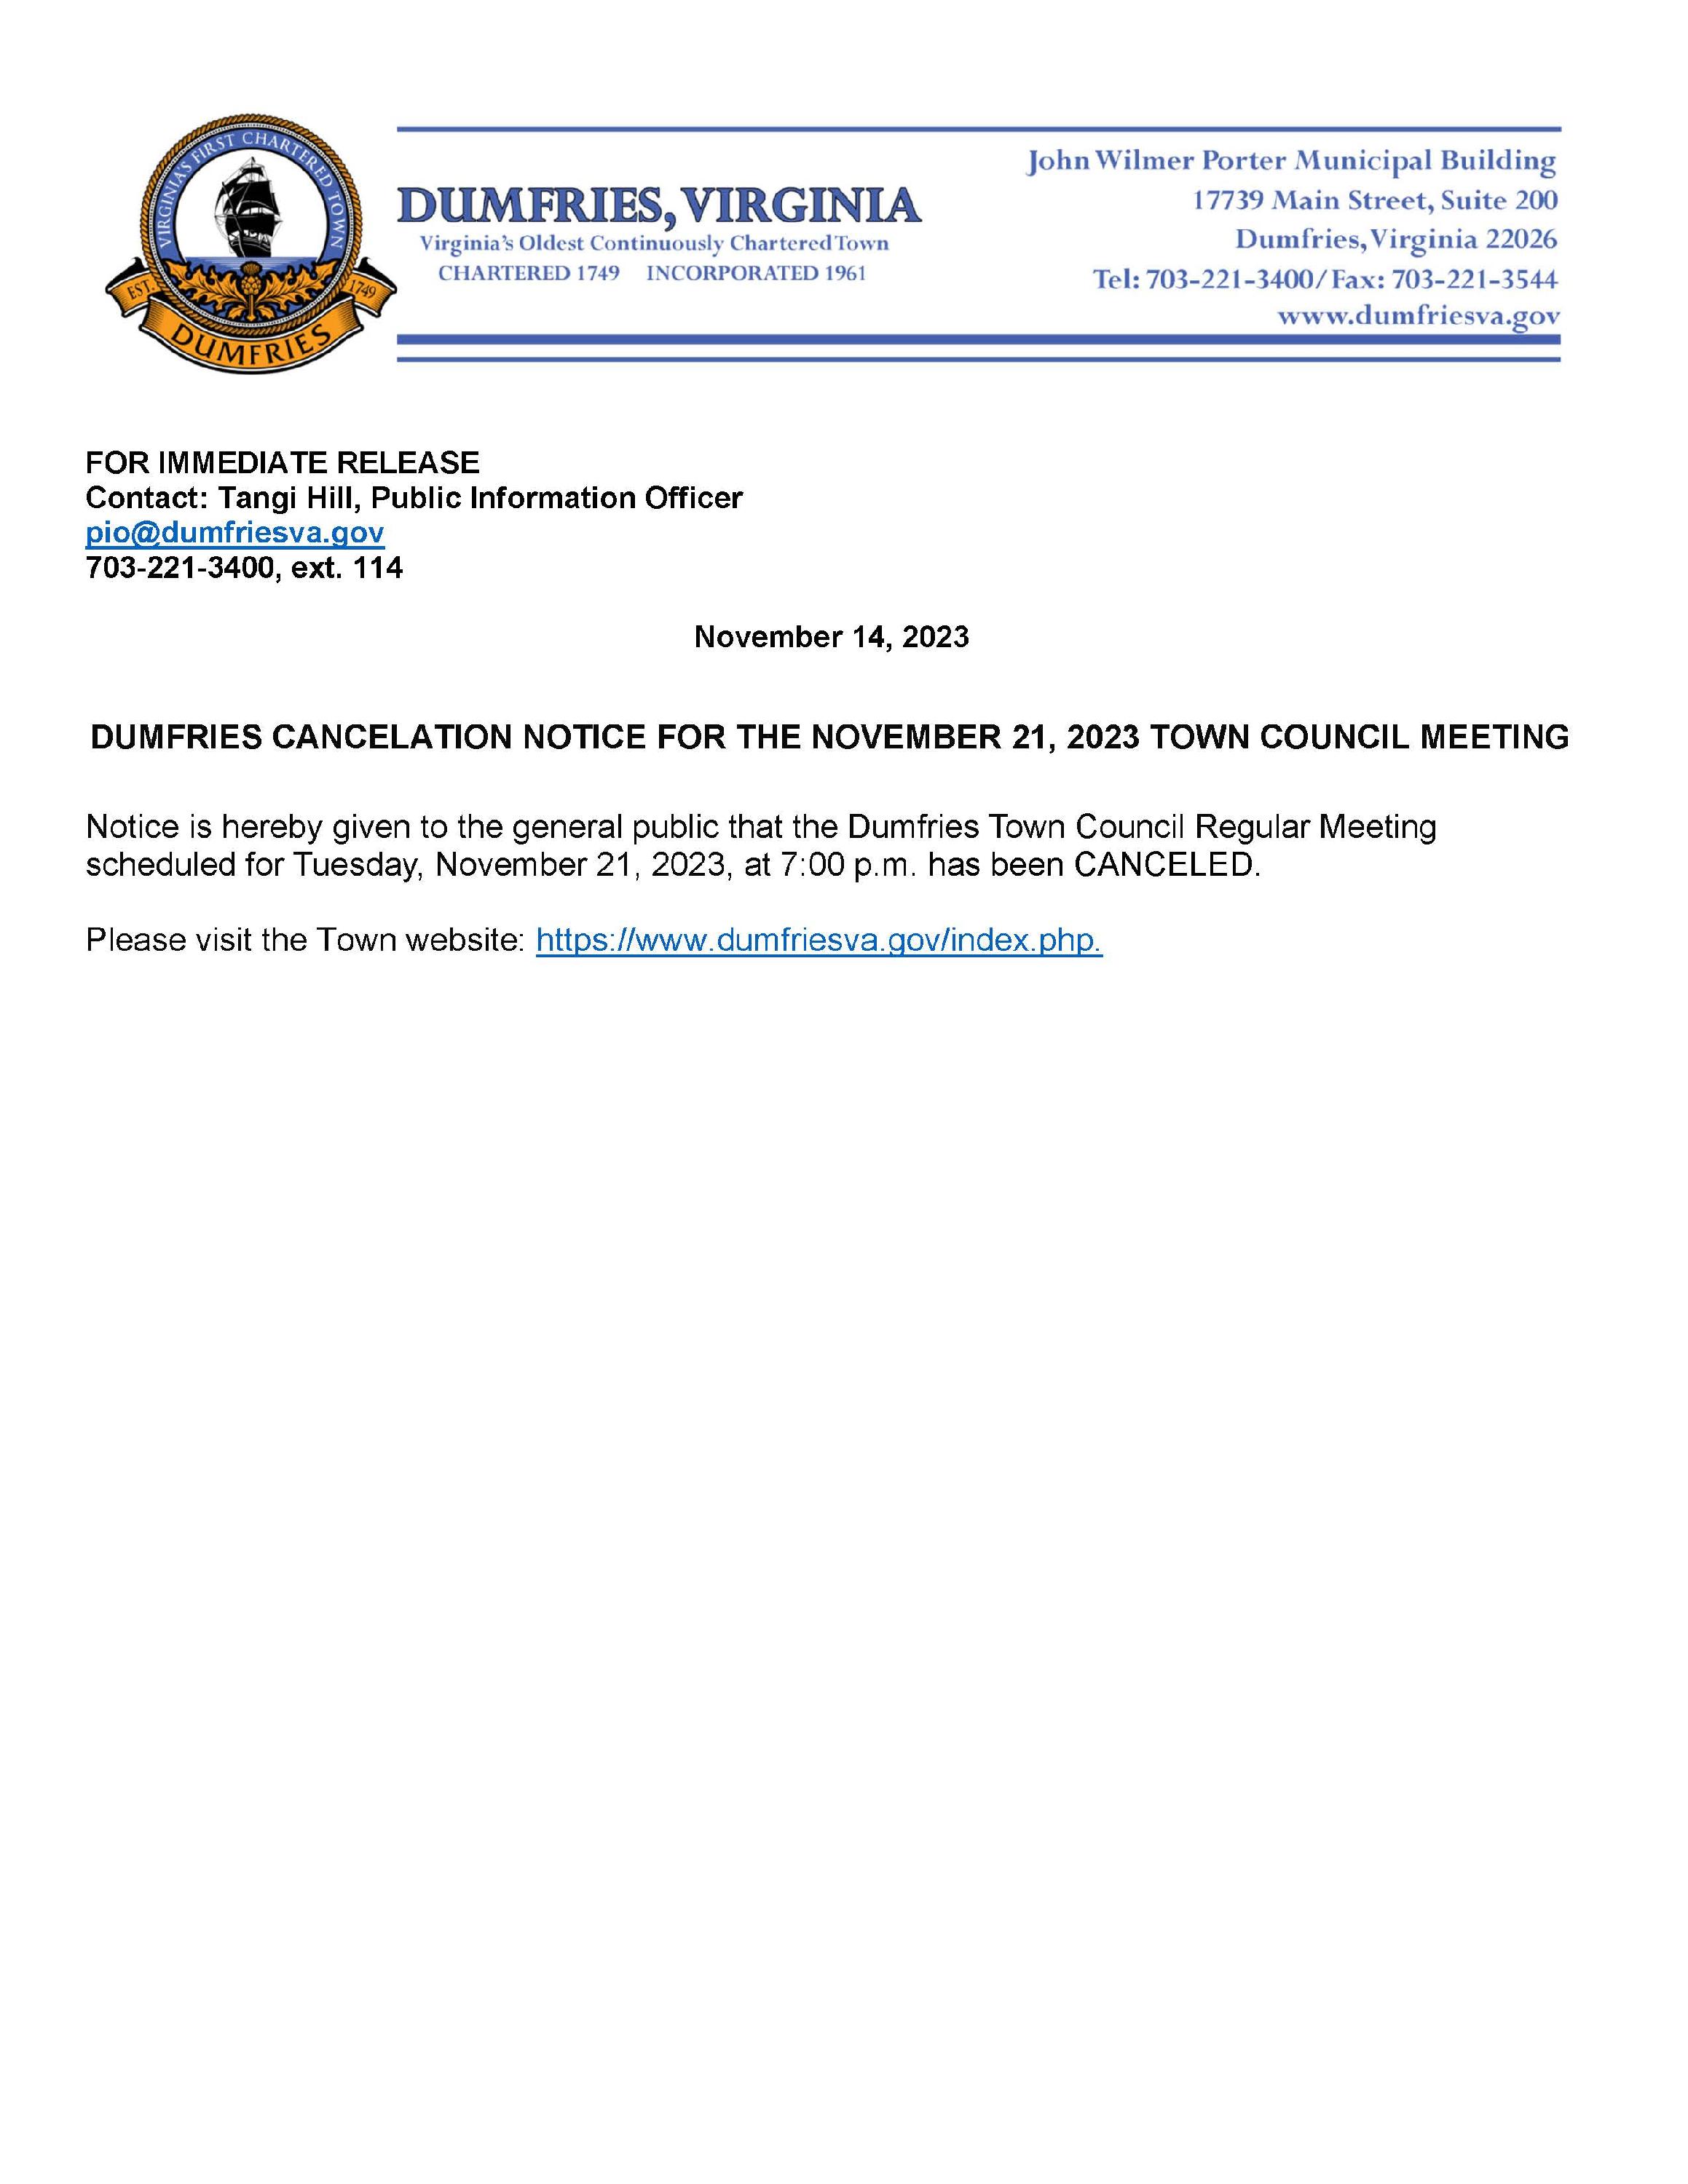 Town Council Meeting Cancellation Notice 11212023